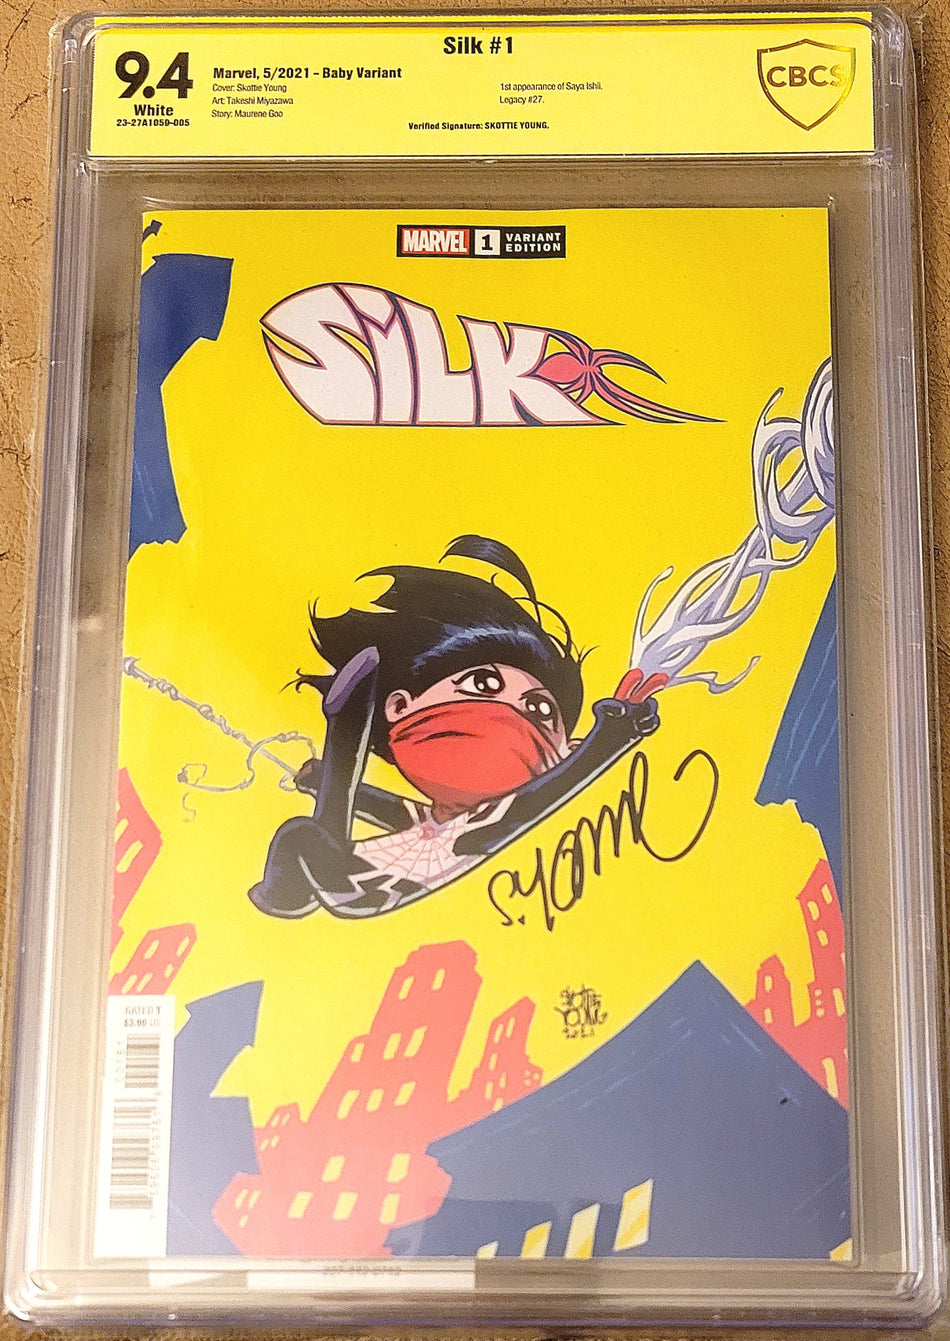 Silk #1 CBCS 9.4 Skottie Young Variant VERIFIED SIGNATURE Signed by Skottie Young